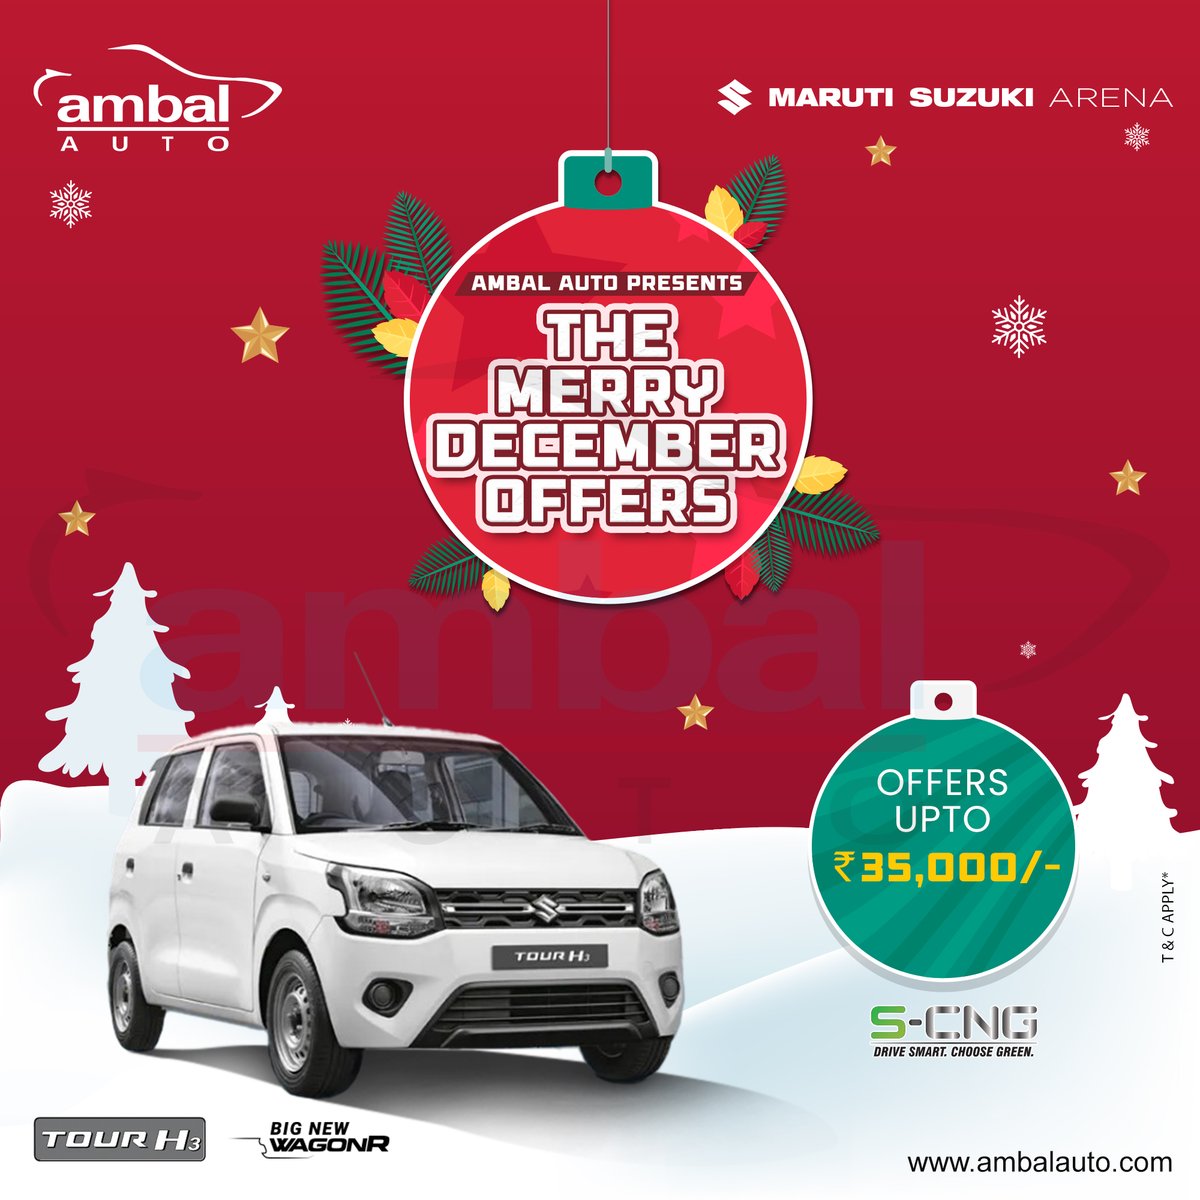 Ready to go green this merry season? You will also get to enjoy the Merry December Offers by Ambal Auto which gives a maximum offer of up to Rs. 35,000 on the Tour H3 Big New WagonR powered by CNG.

#AmbalAuto #SilverJubilee #Nexa #Arena #SCNG #WagonR #TourH3 #MerryDecemberOffers